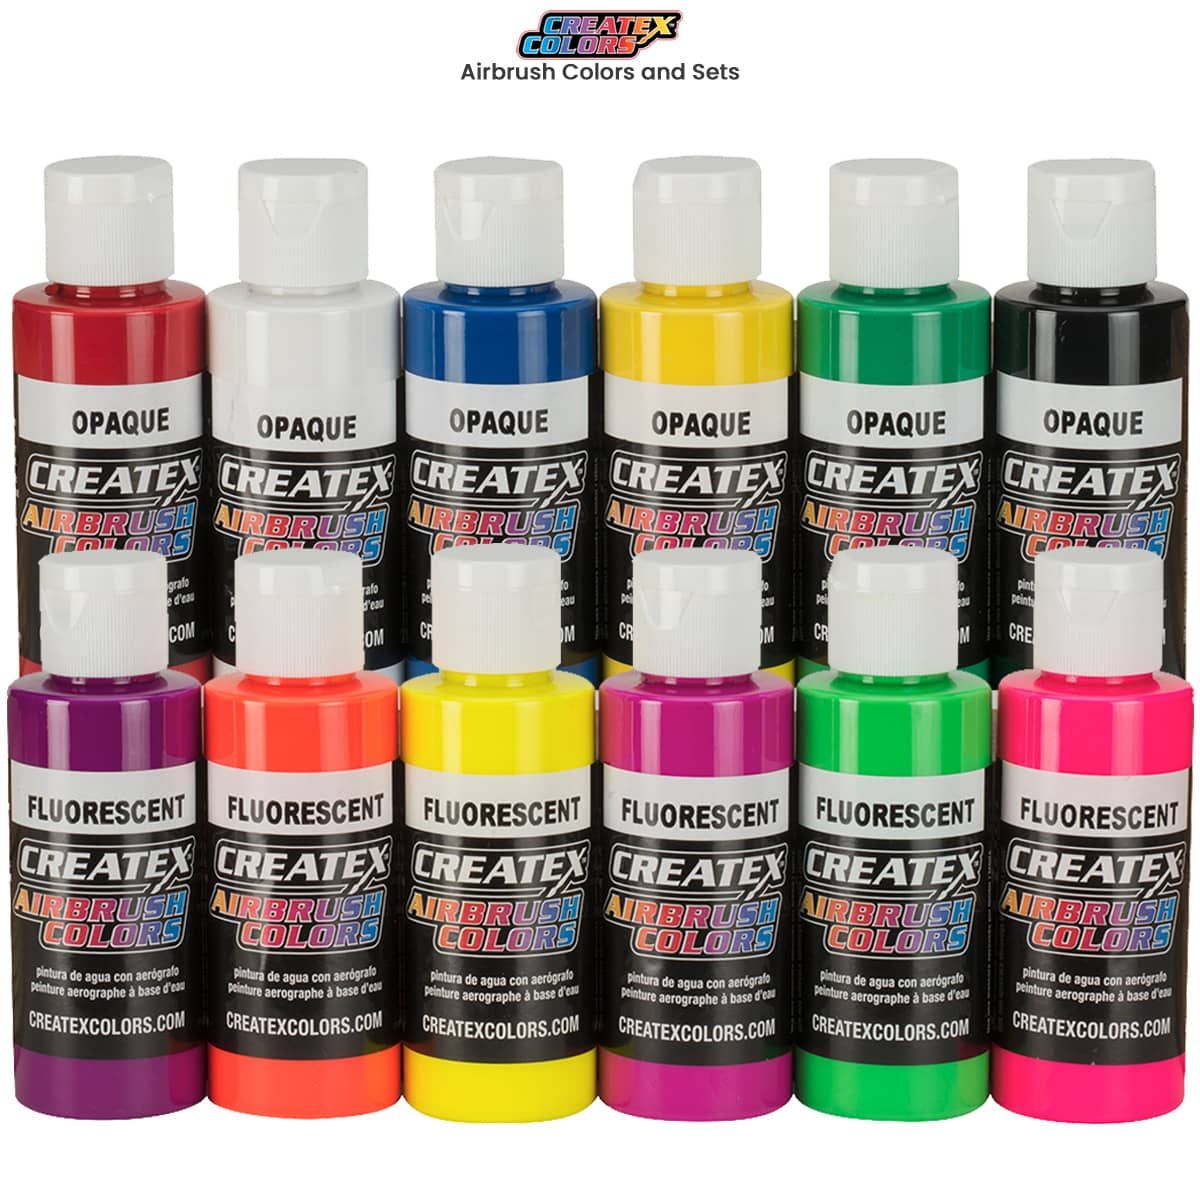 Quick Color Change Airbrush 6 in 1 Kit with Metal Airbrush Holder